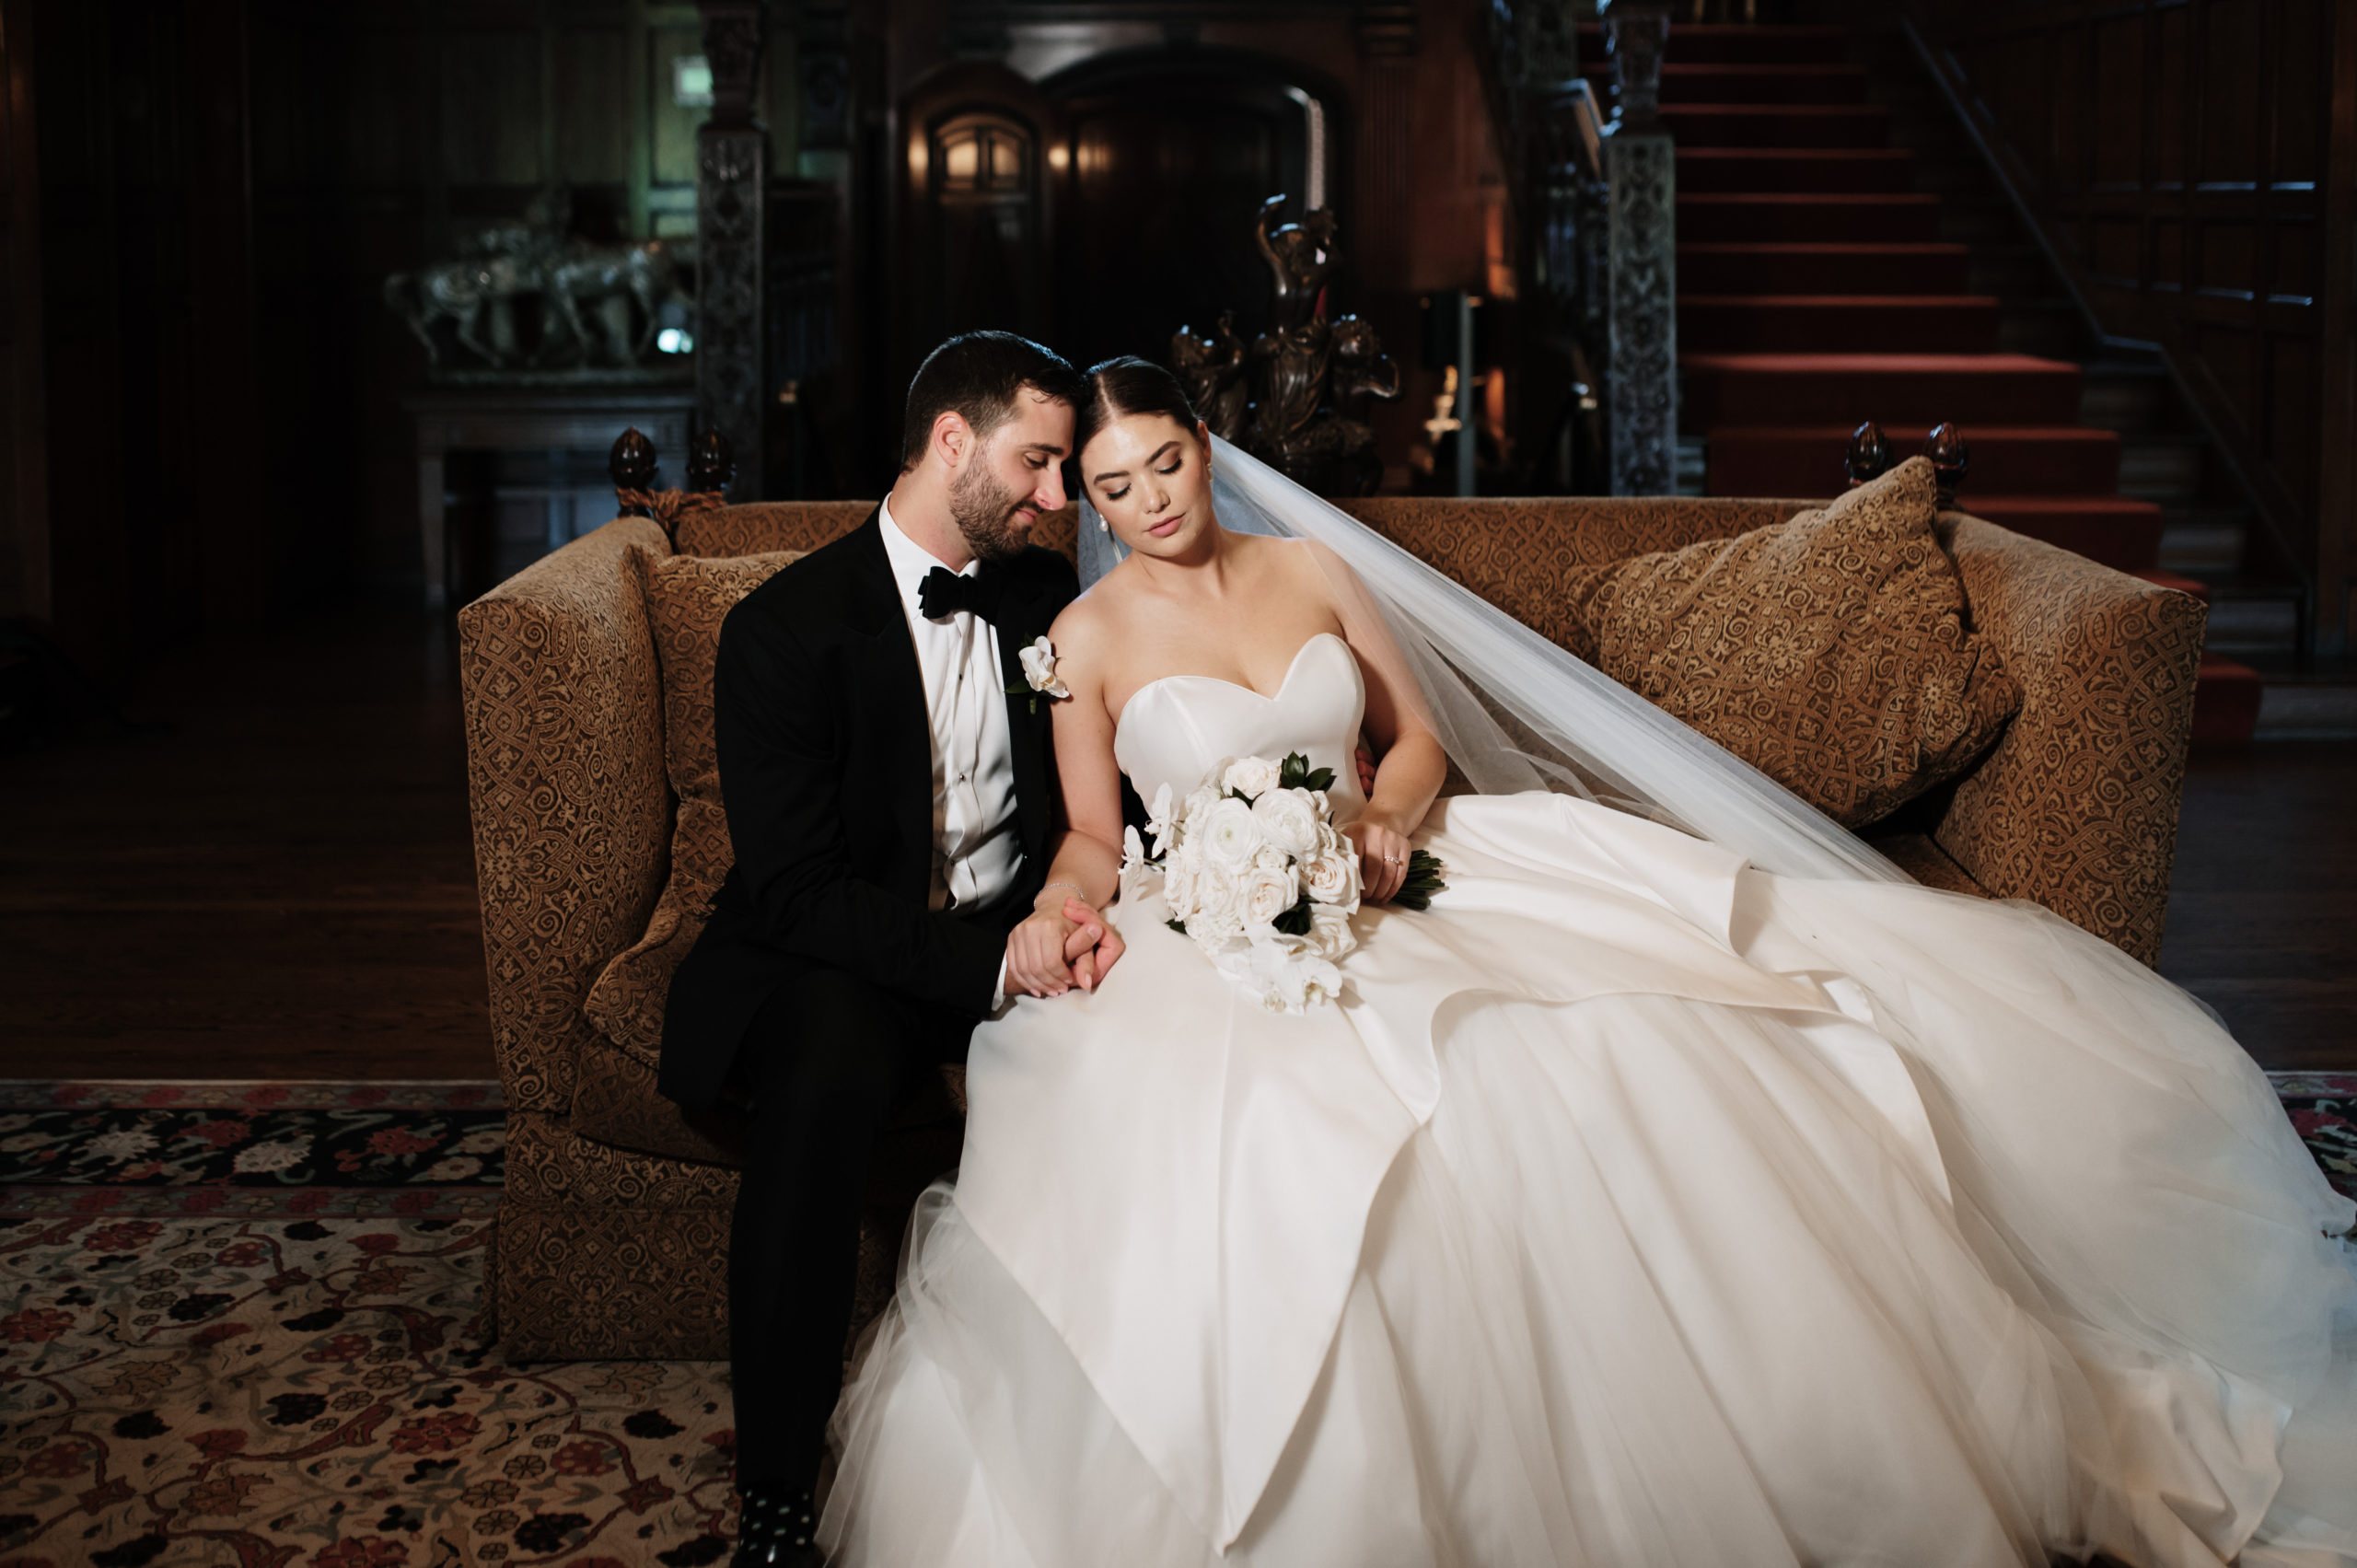 Wedding portraits of bride and groom with professional lighting